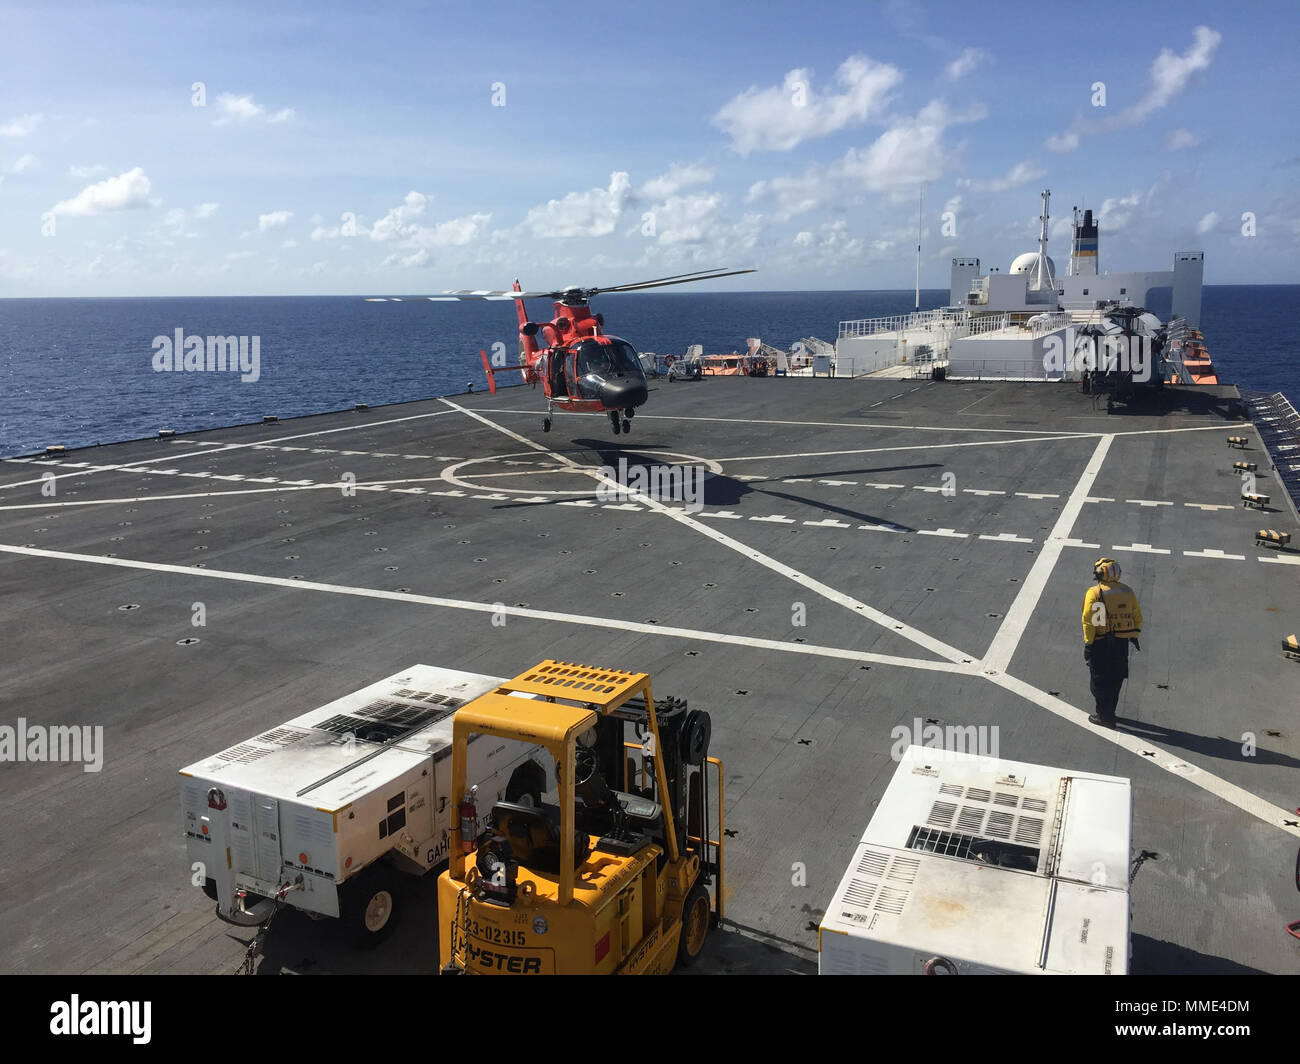 An HH-65 Dolphin helicopter crew from Coast Guard Air Station Borinquen, Puerto Rico, conducted helicopter operations with the USNS Comfort Oct. 25, 2017.  This training gave the pilots and aircrew the necessary familiarization to conduct medical evacuations to the hospital ship in response to Hurricane Maria. U.S. Coast Guard photo by Lt. Waymondo Brown. Stock Photo